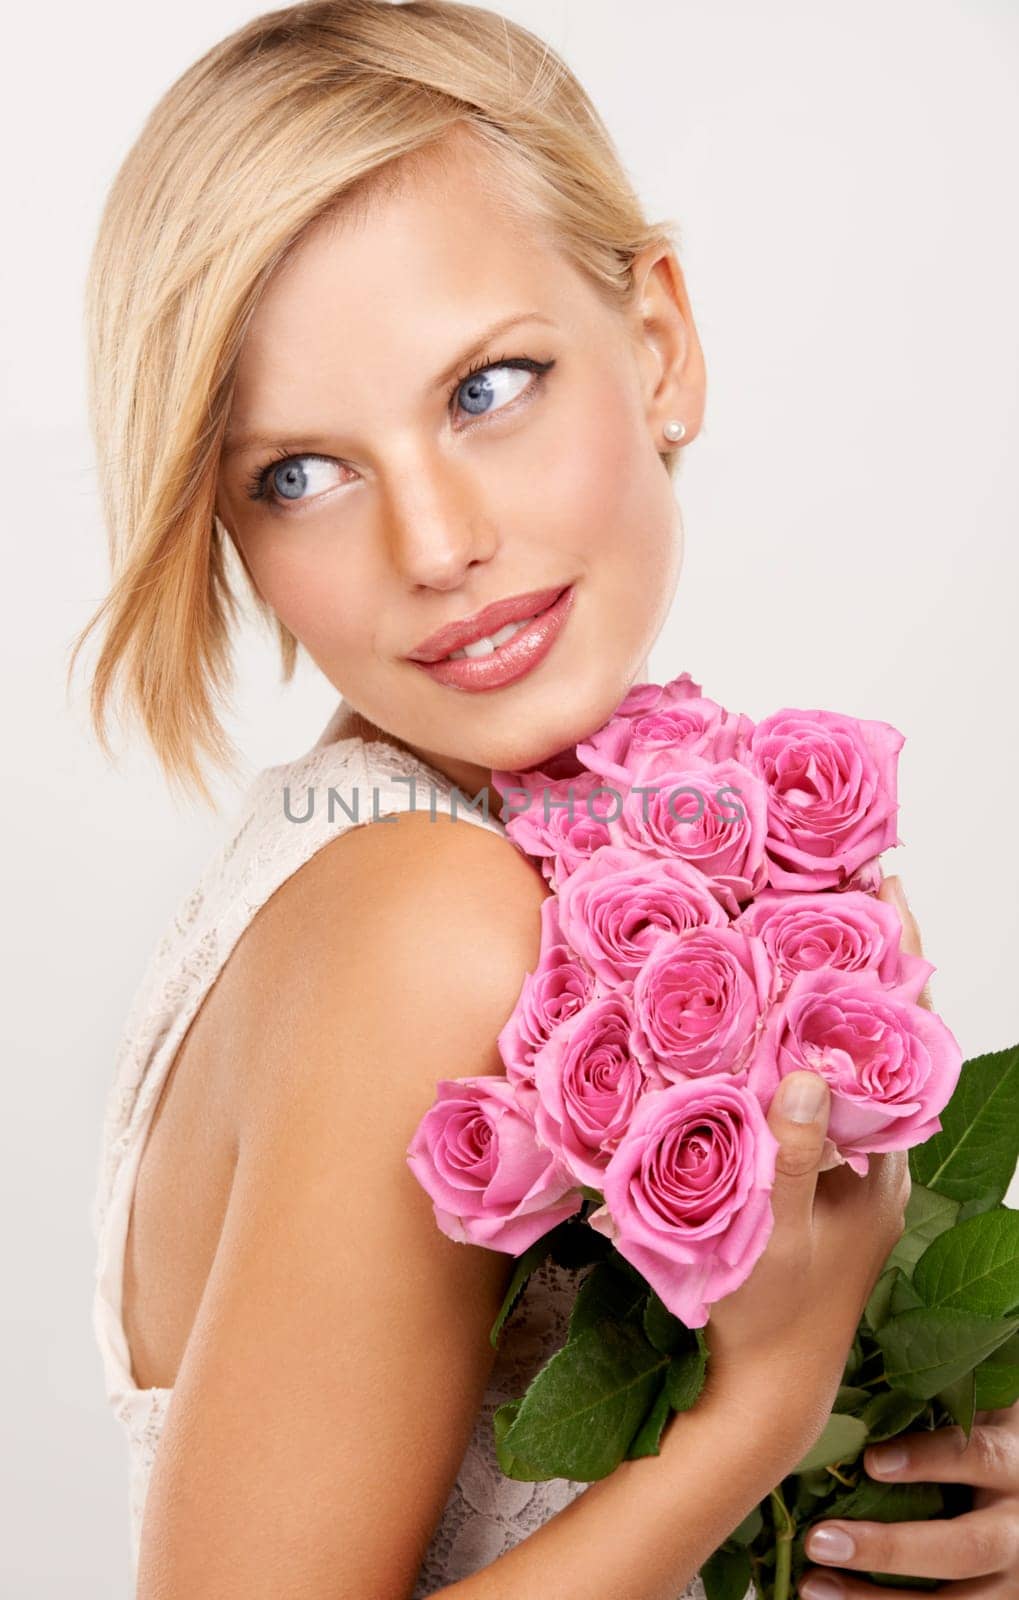 Flowers, bouquet and rose with woman in studio for floral, valentines day and romance gift. Plants, beauty and happy with face of female person on white background for elegant, love and present.